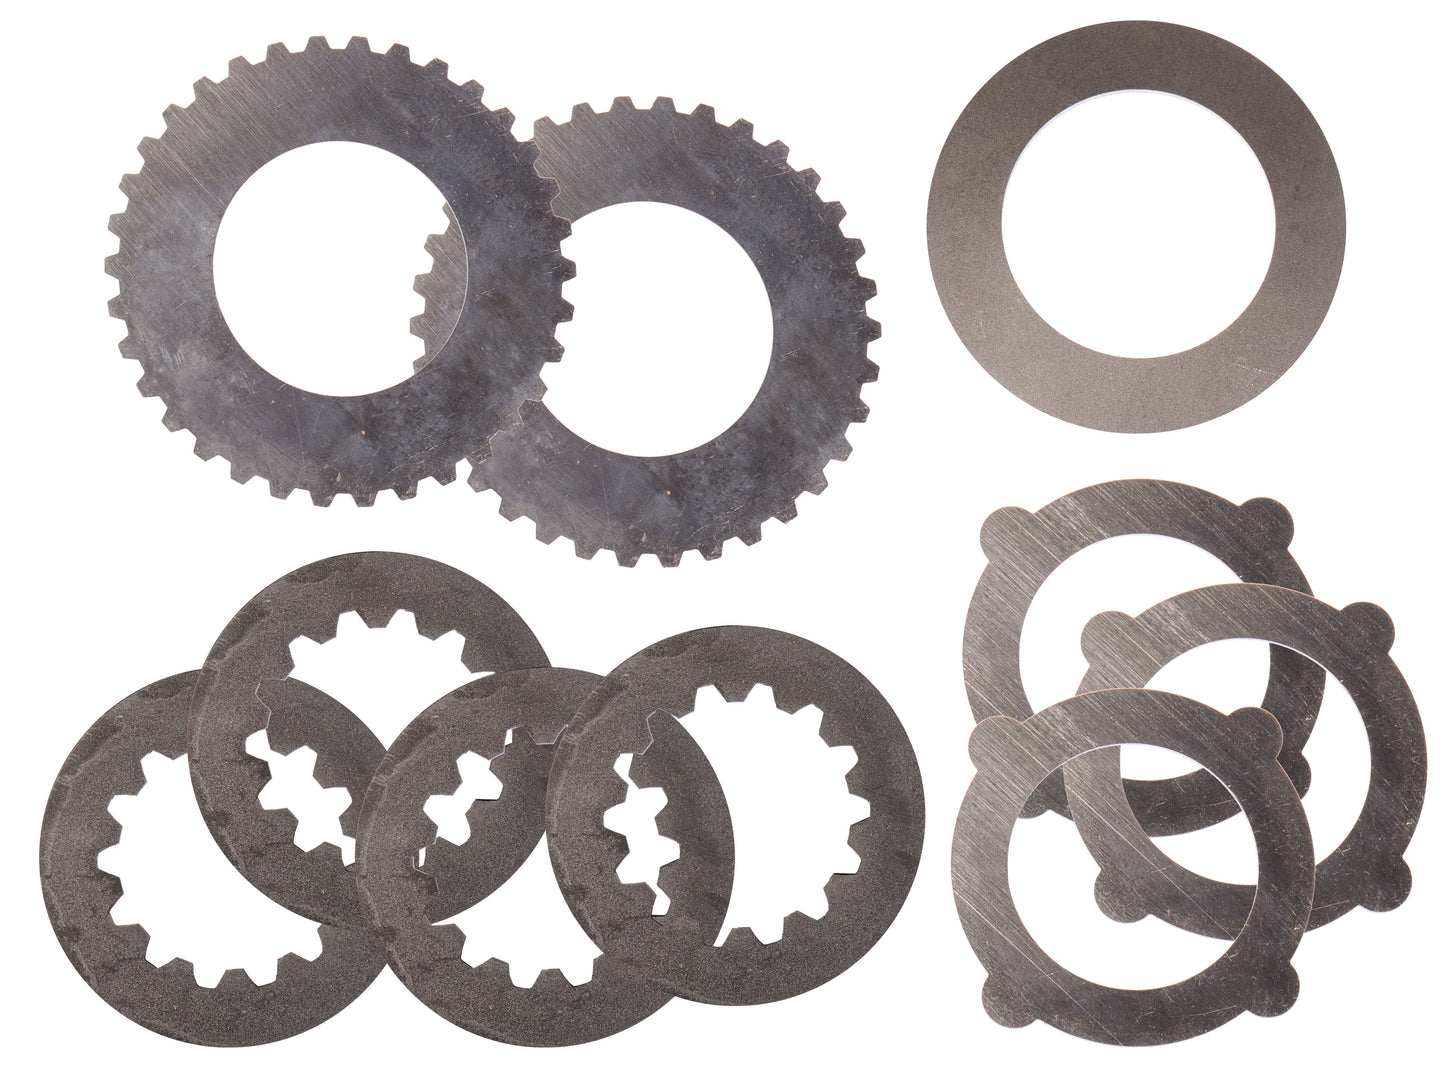 REPLACEMENT CLUTCH PACK FOR NXG LSD - MINI